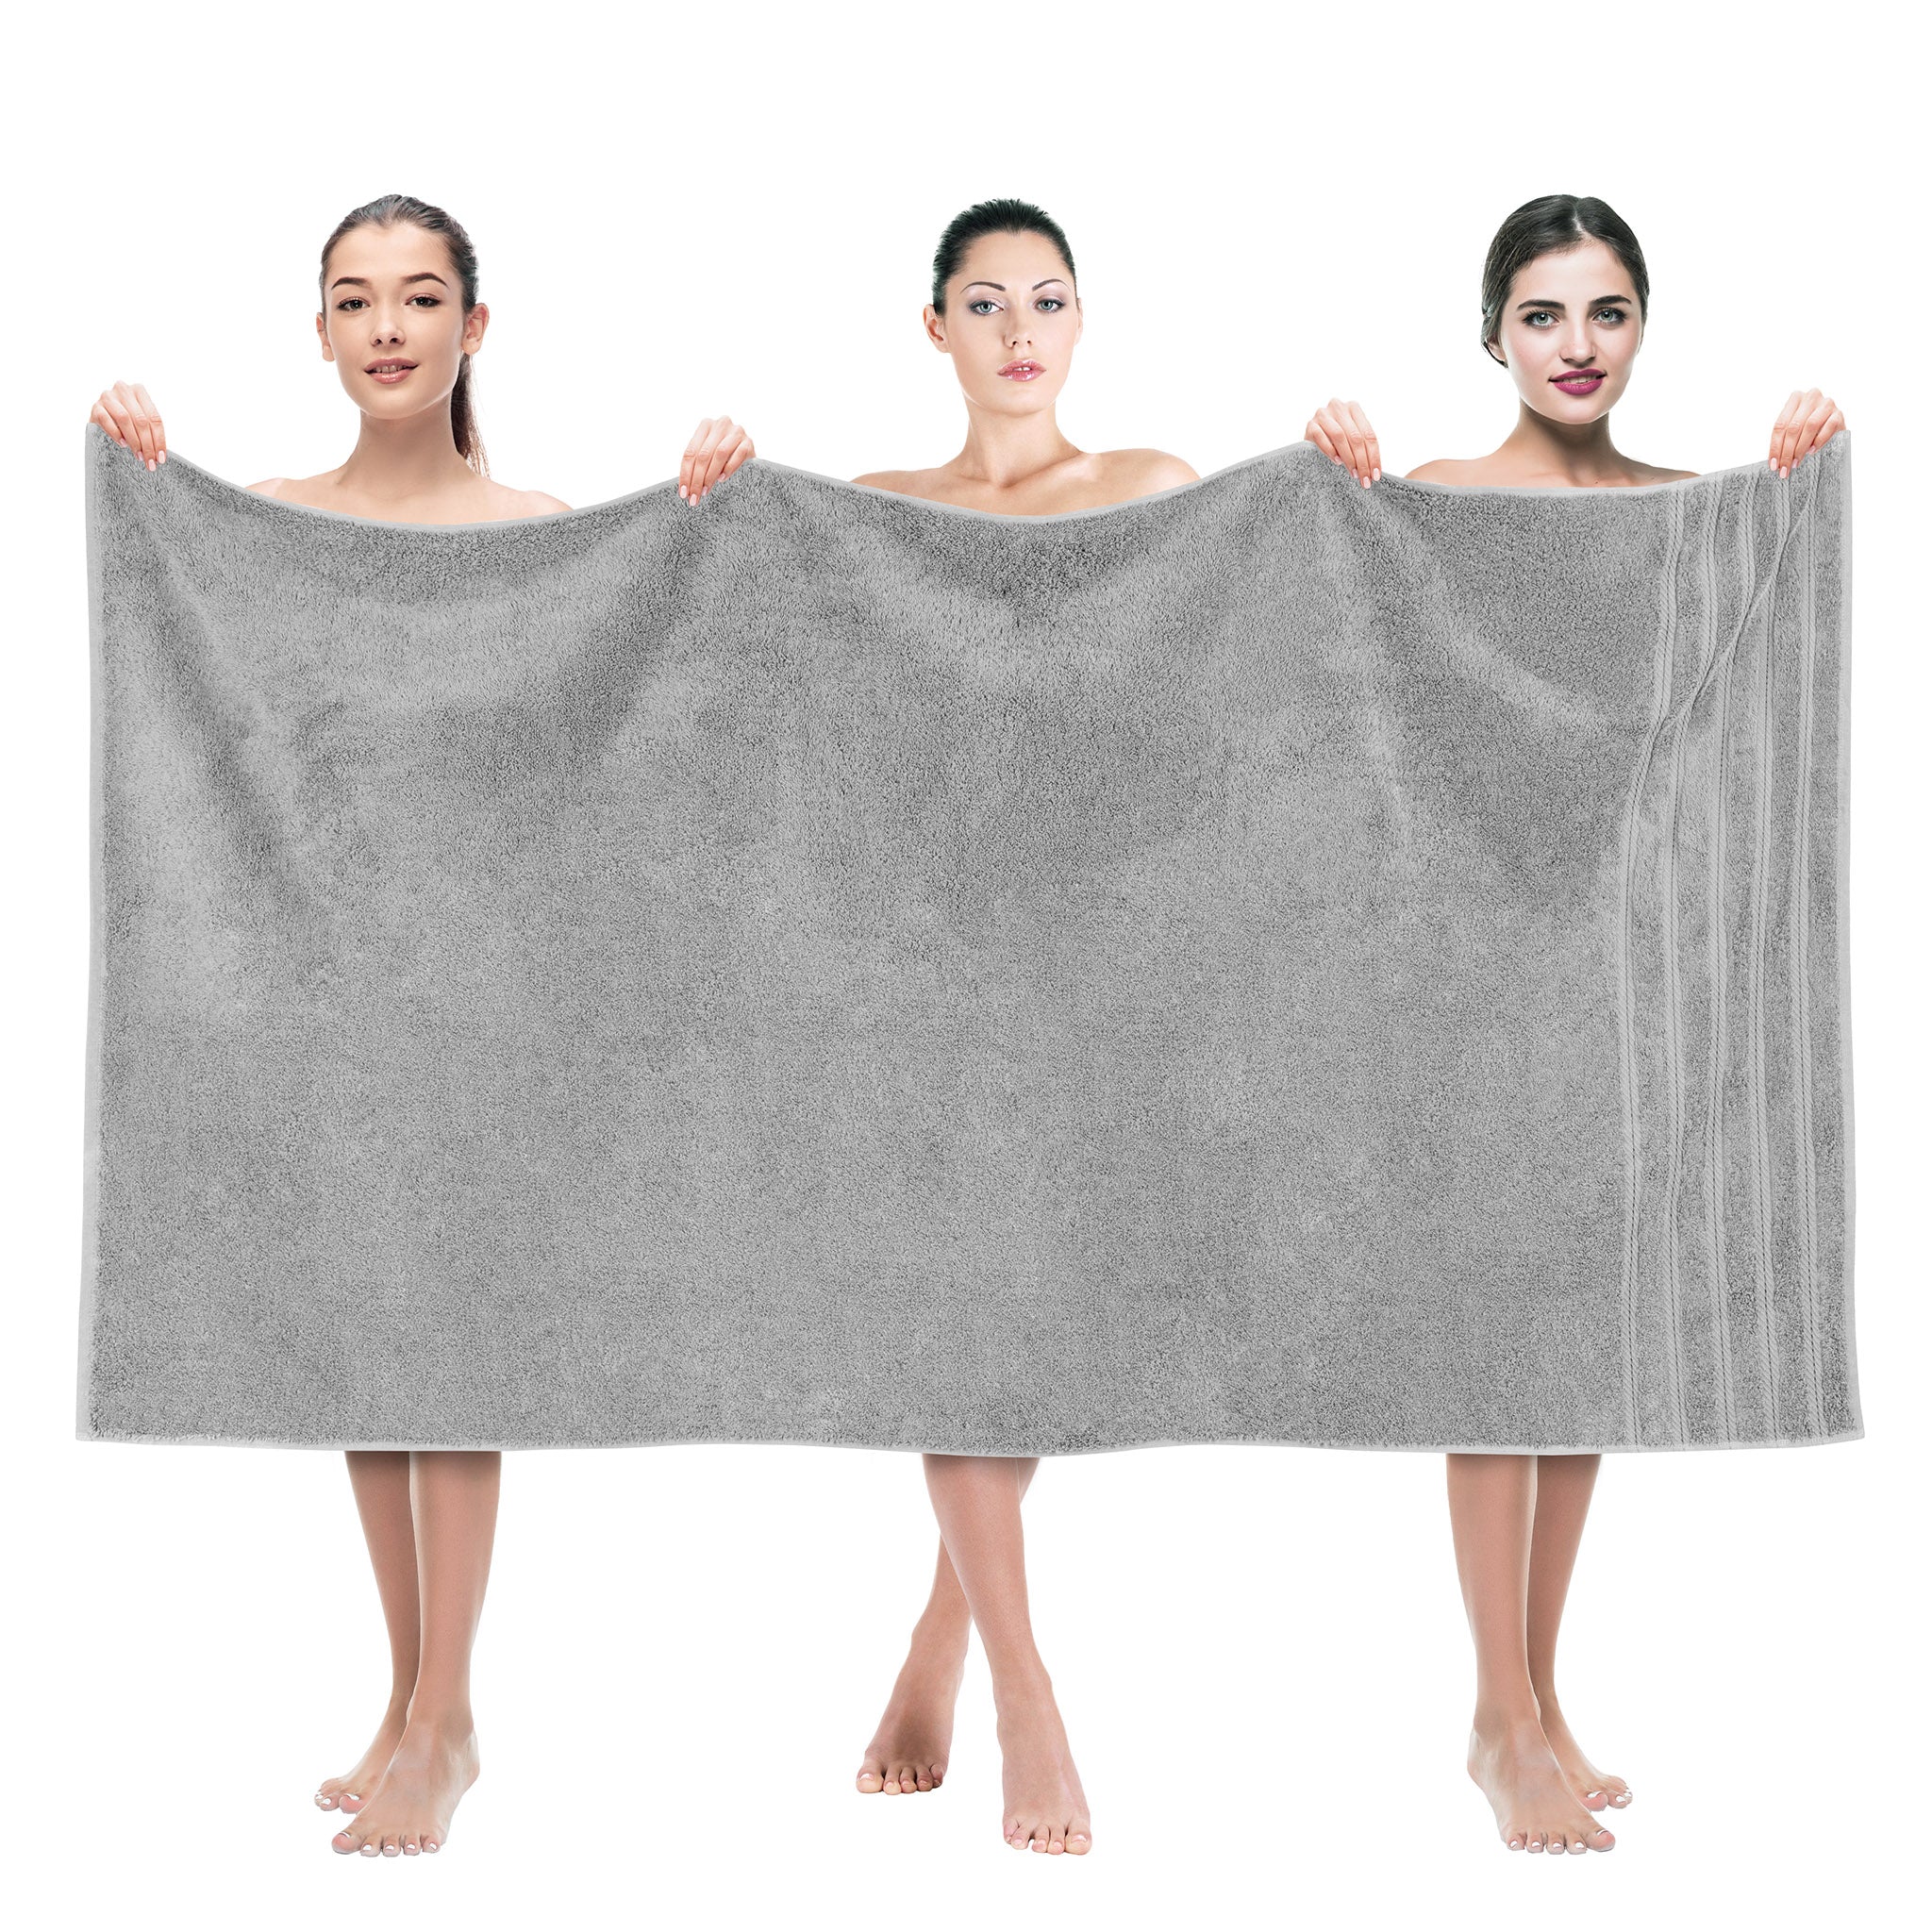 Extra Large Oversized Bath Towels, 100% Cotton Turkish Towels, Grey, 35x80  inch - Maximum Softness and Absorbency Bath Sheet, Heavy Weight 1000 Grams